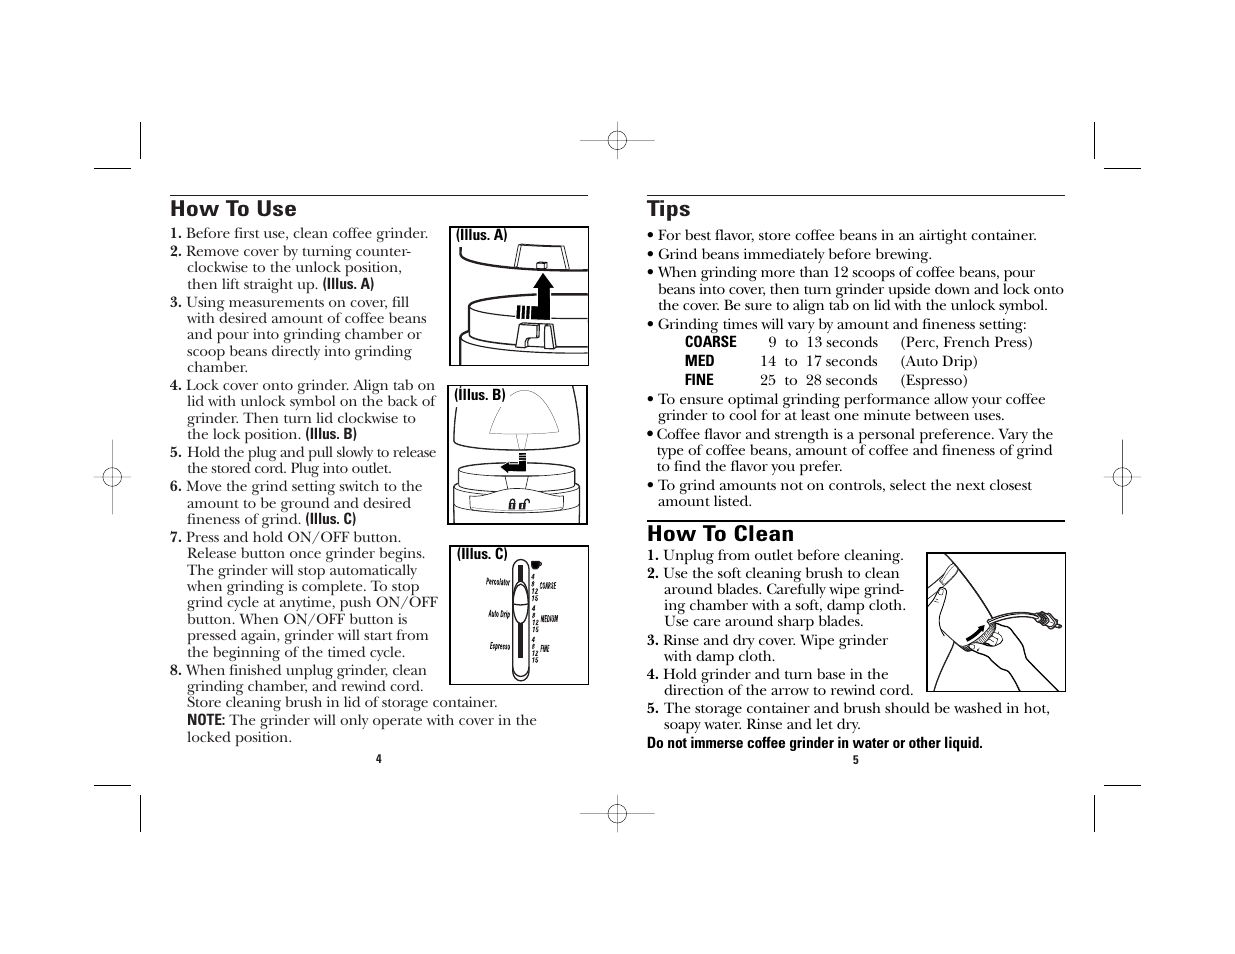 Tips, How to use, How to clean | GE 169028 User Manual | Page 3 / 8